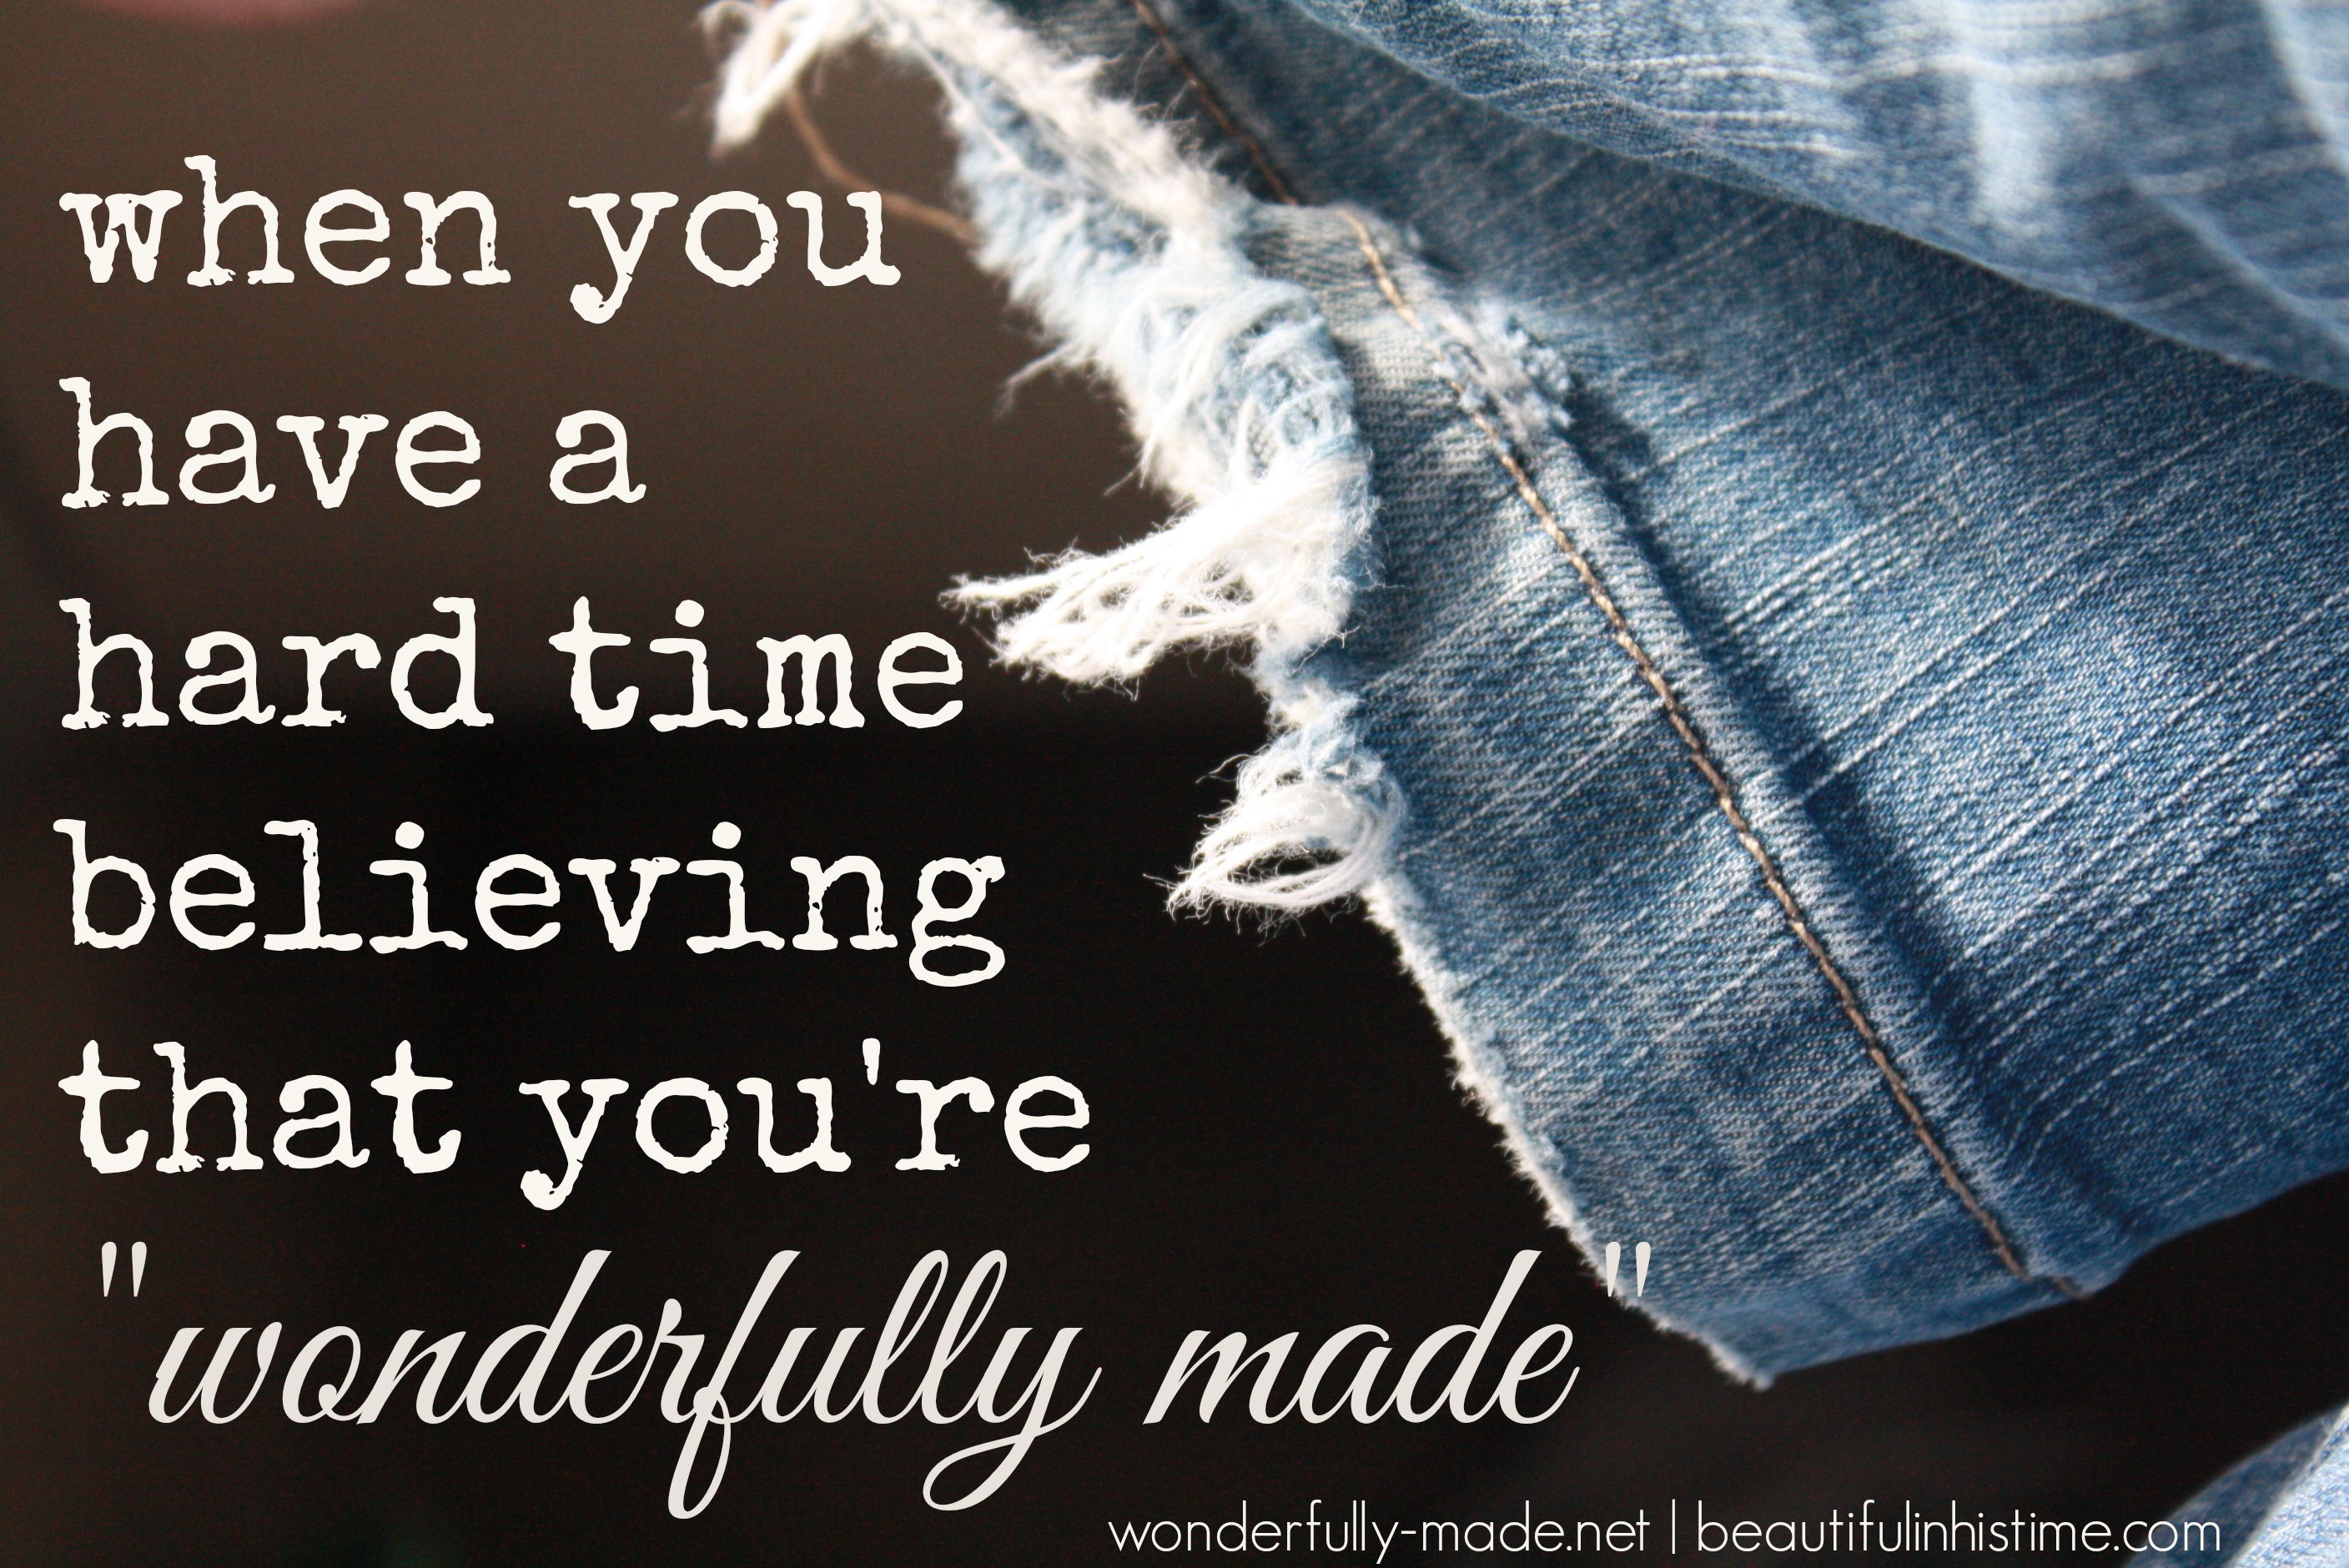 when you have a hard time believing that you're wonderfully made